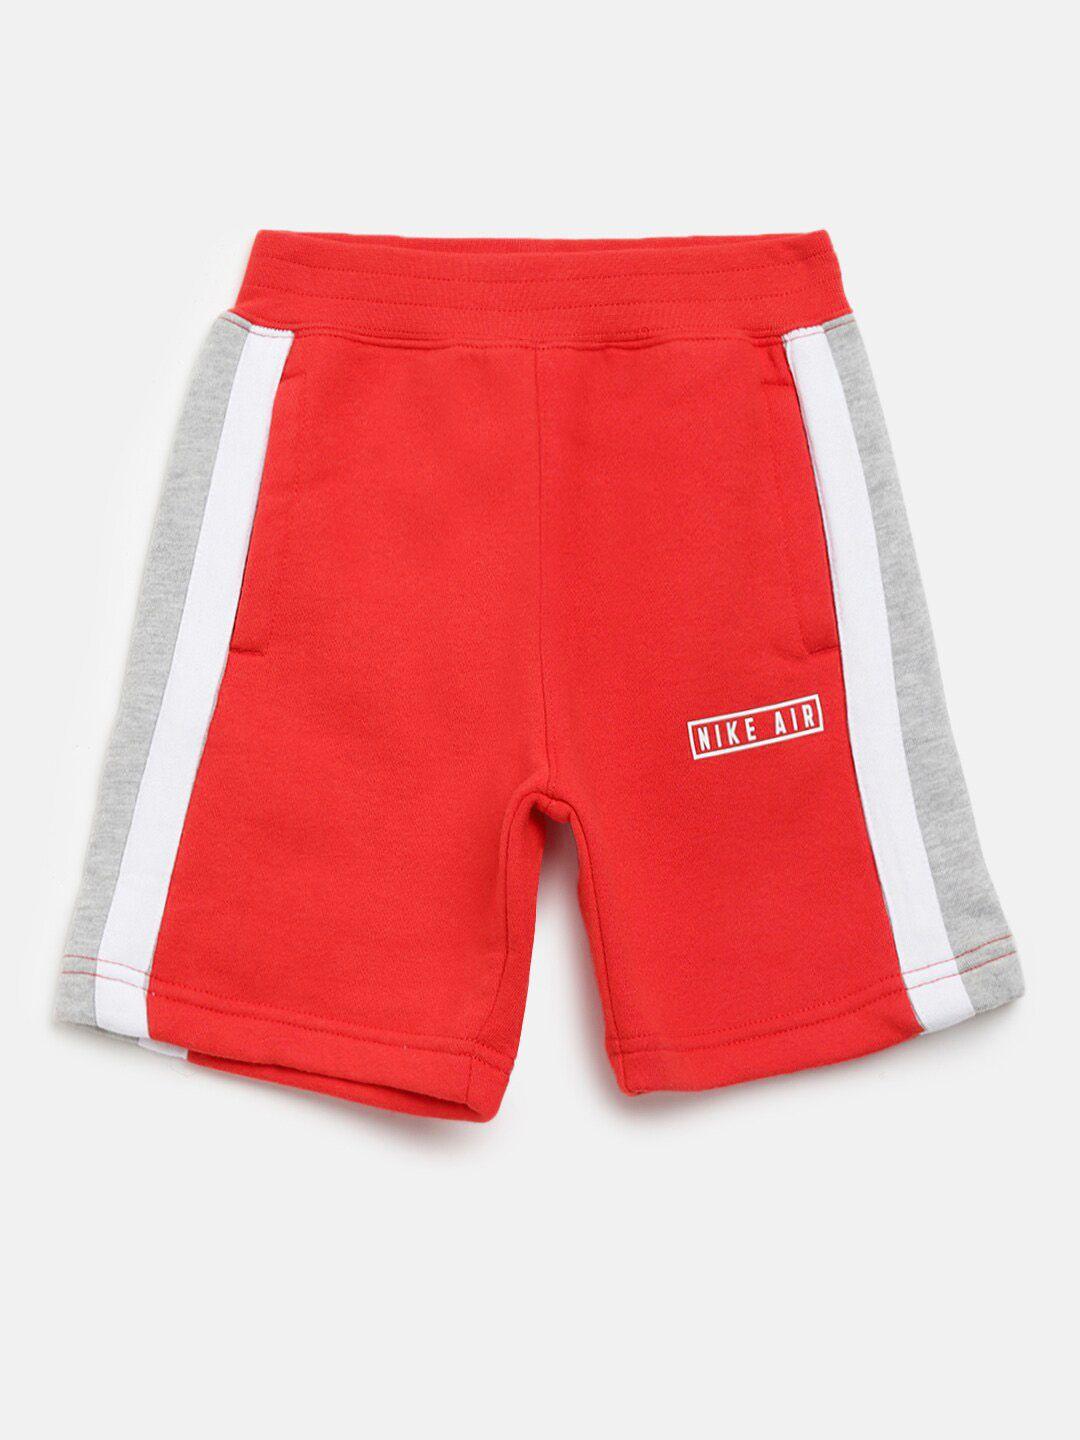 nike boys red & white solid sports shorts with side panels & air logo print detail